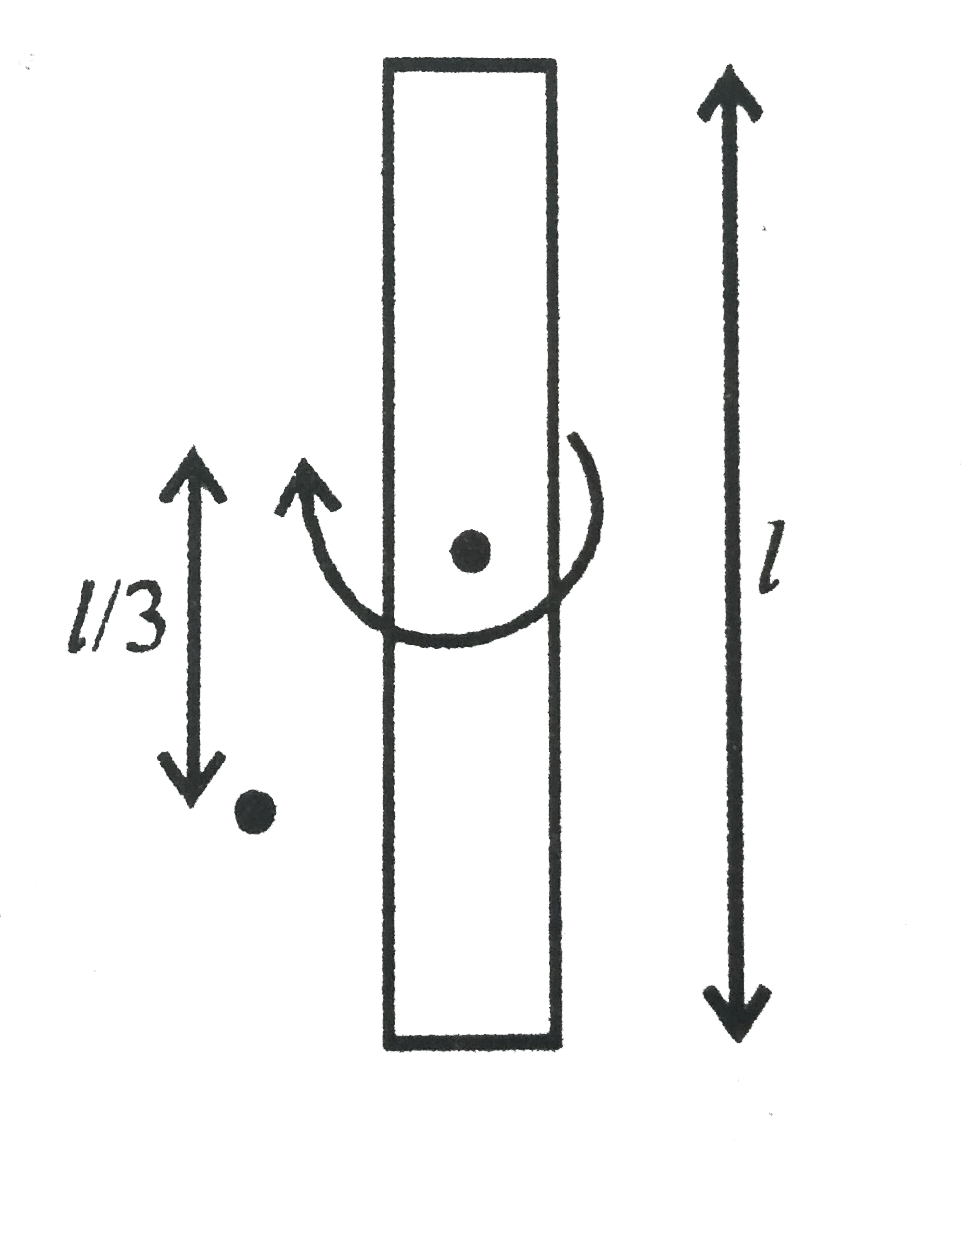 A uniform rod of length l and mass M rotating about a fixed vertical axis on a smooth horizontal table. It elastically strikes a particle placed at a distance l//3 from its axis and stops. Mass of the particle is -   .